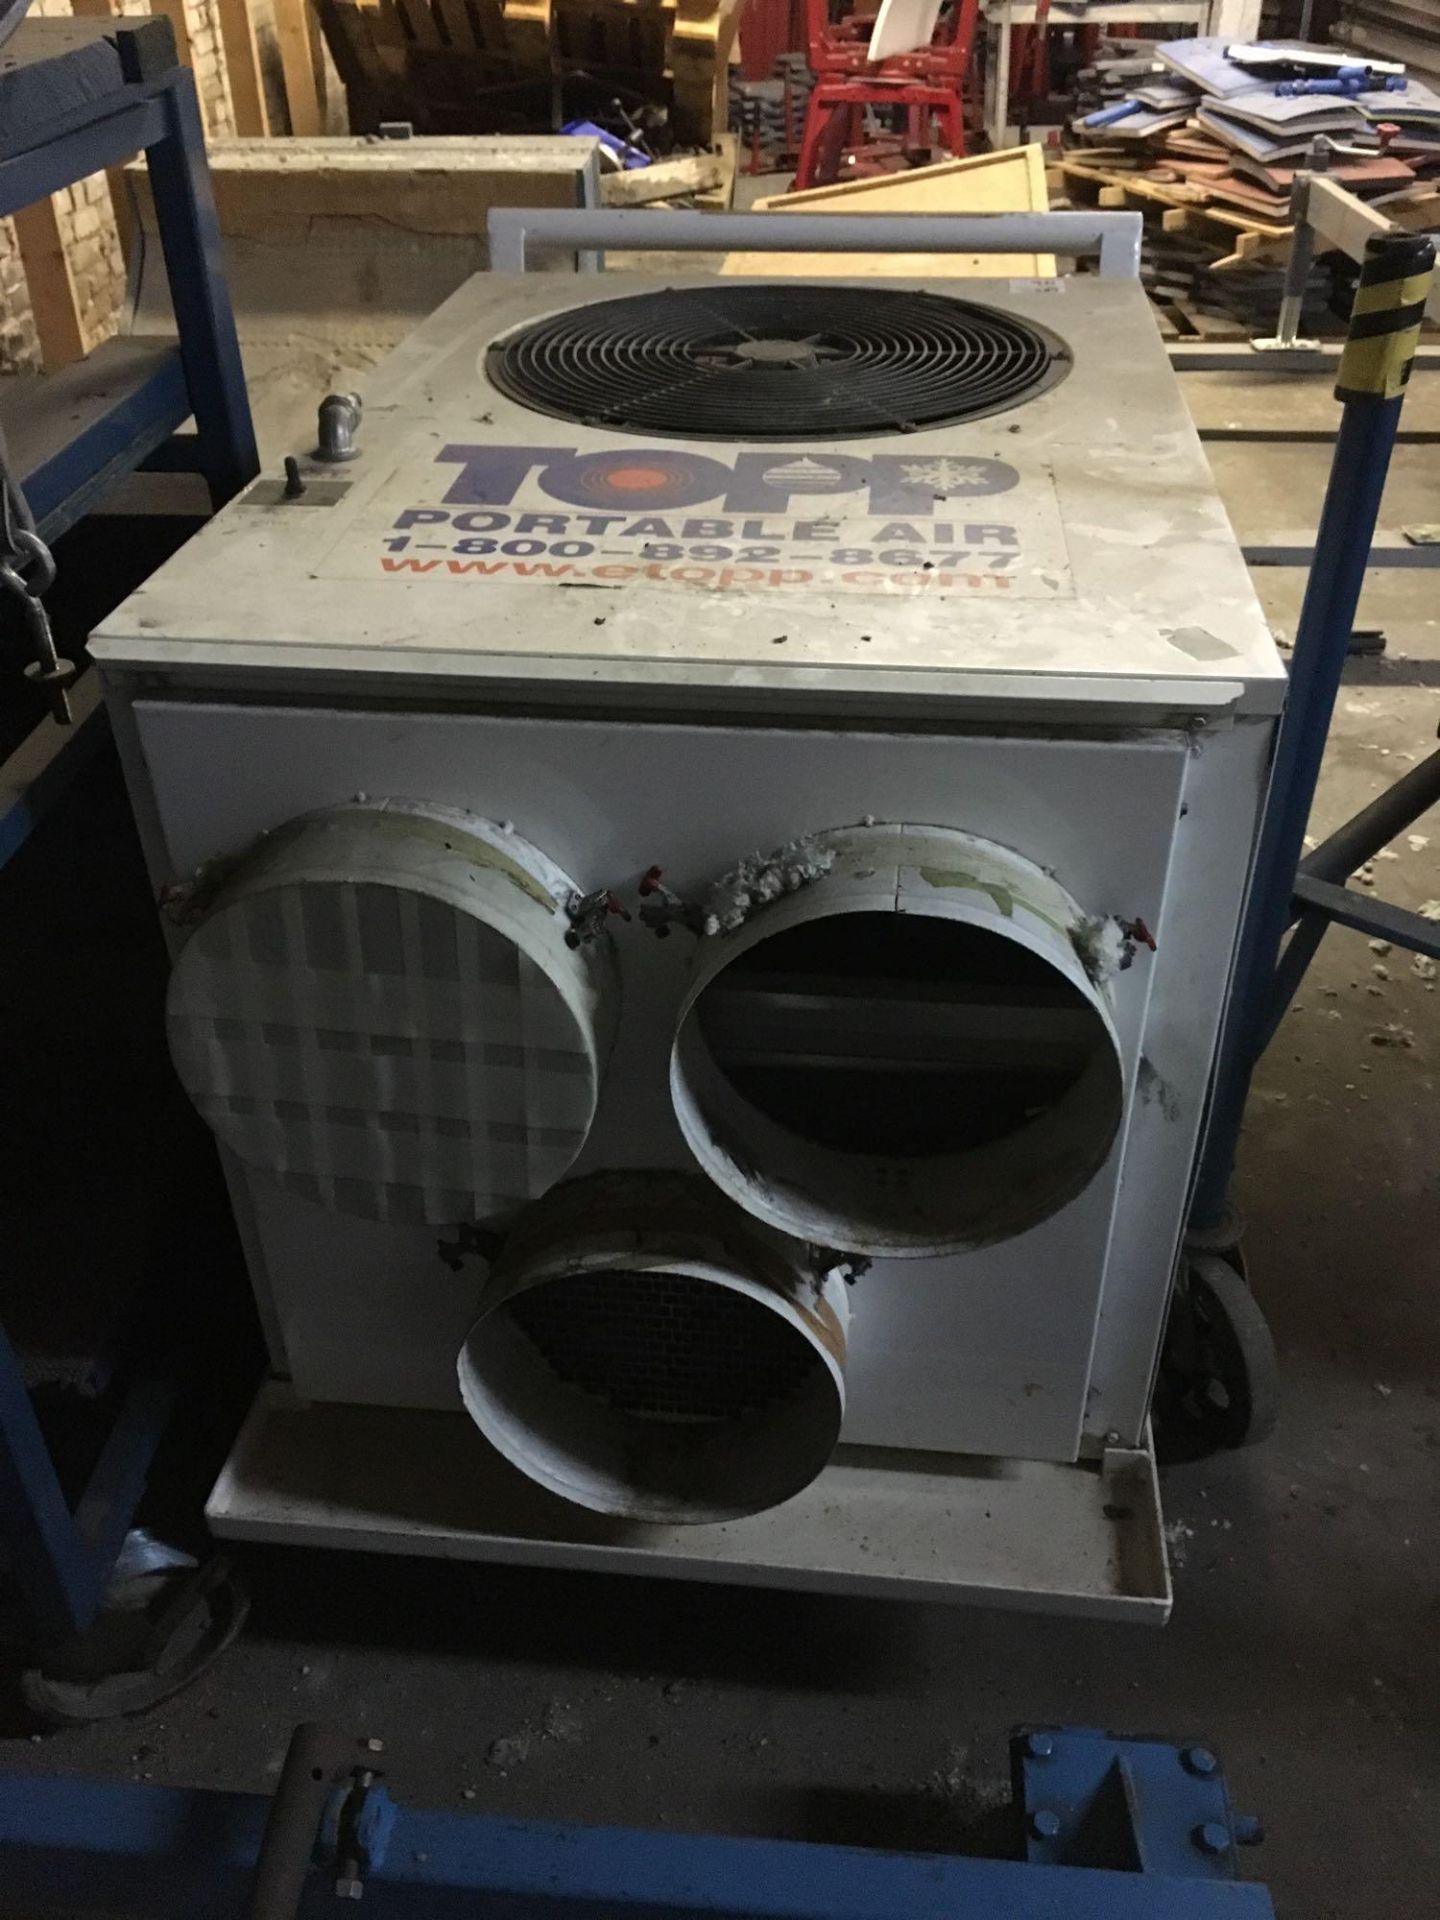 Topp Air Conditioner with Casters - Image 3 of 3